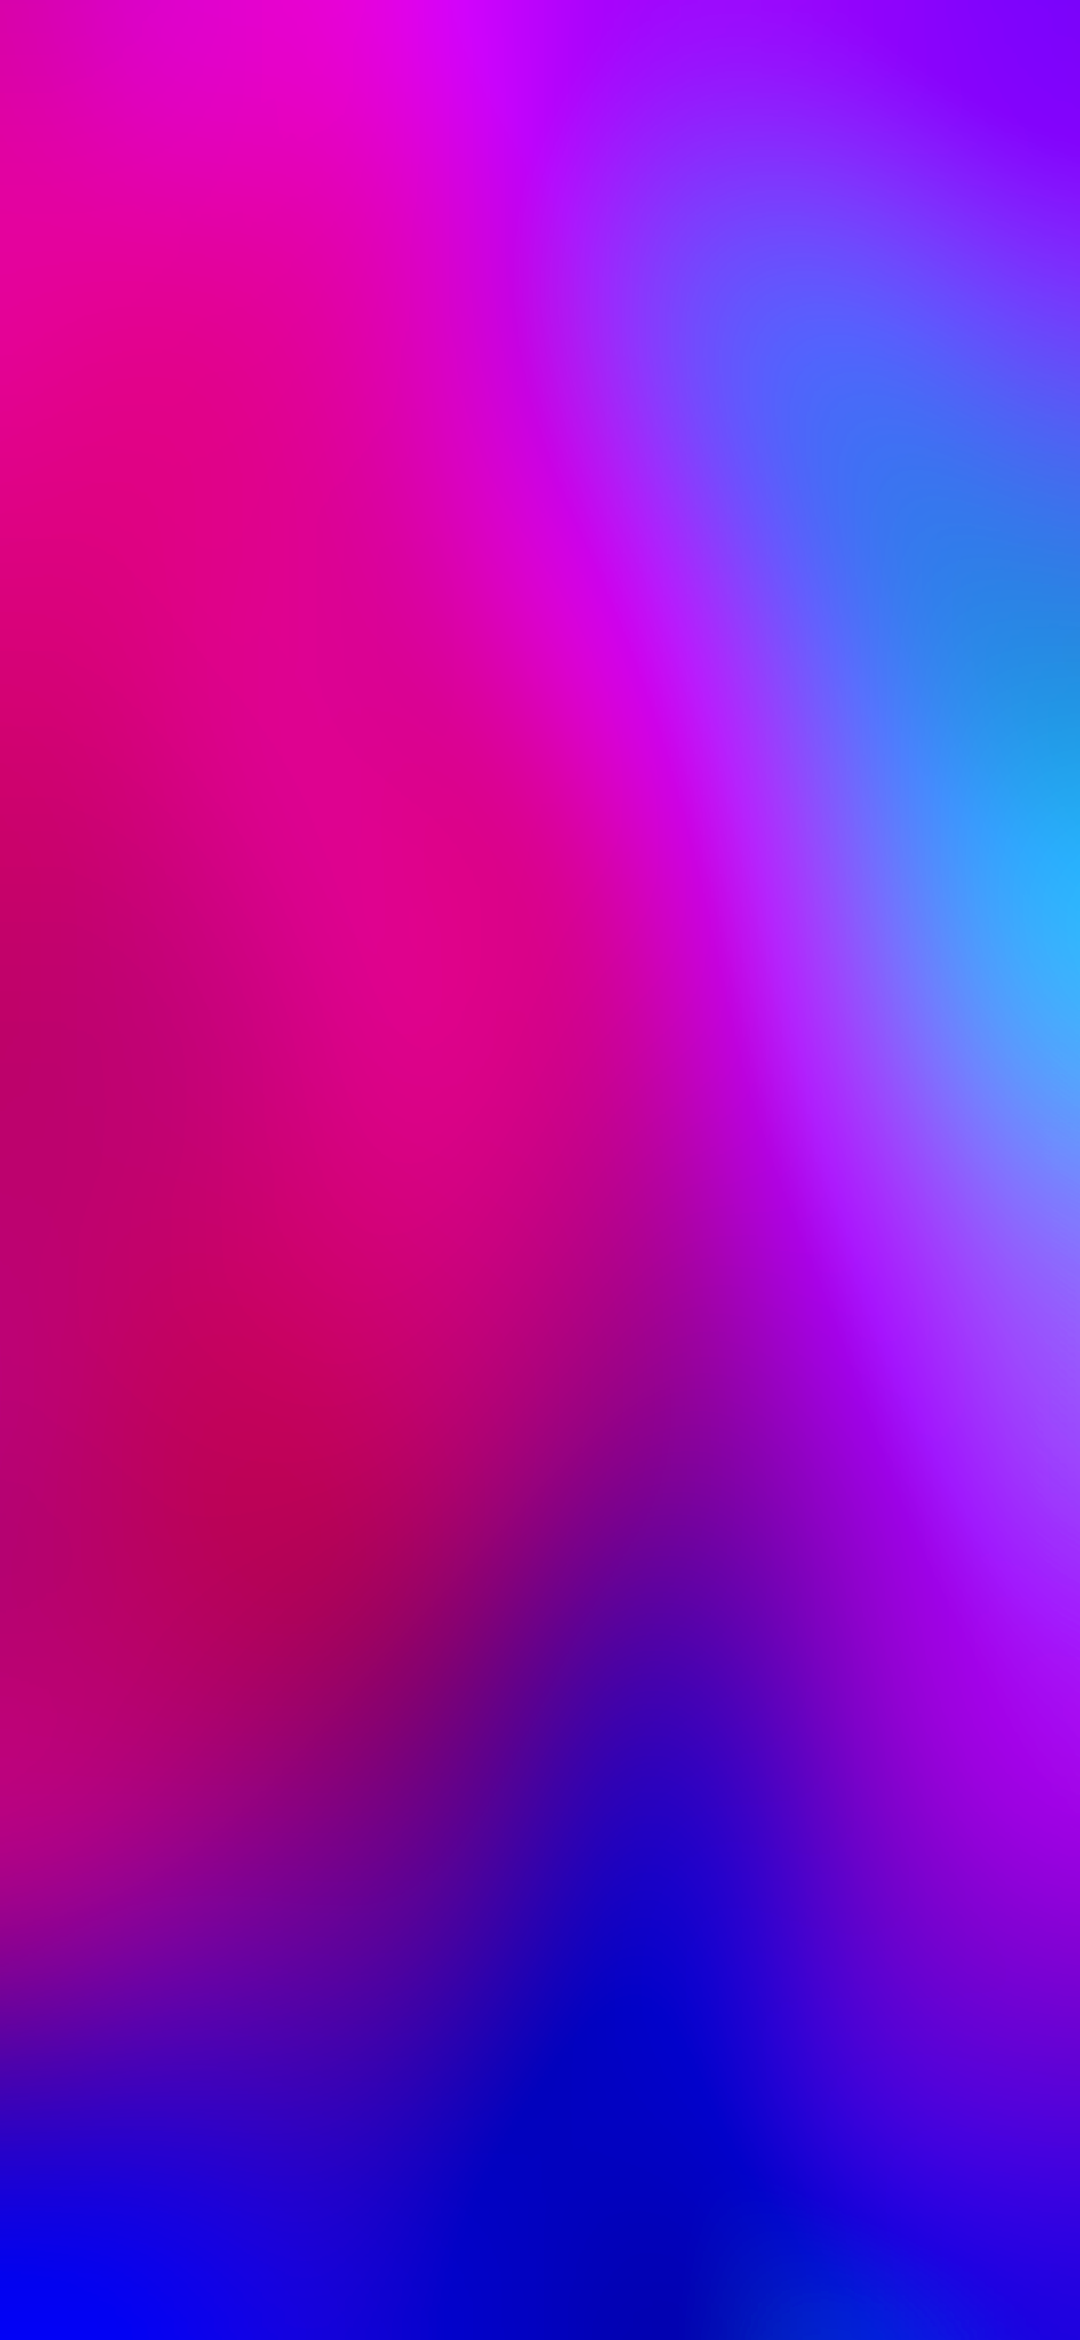 Gradient amoled wallpaper by AnxiousGoose